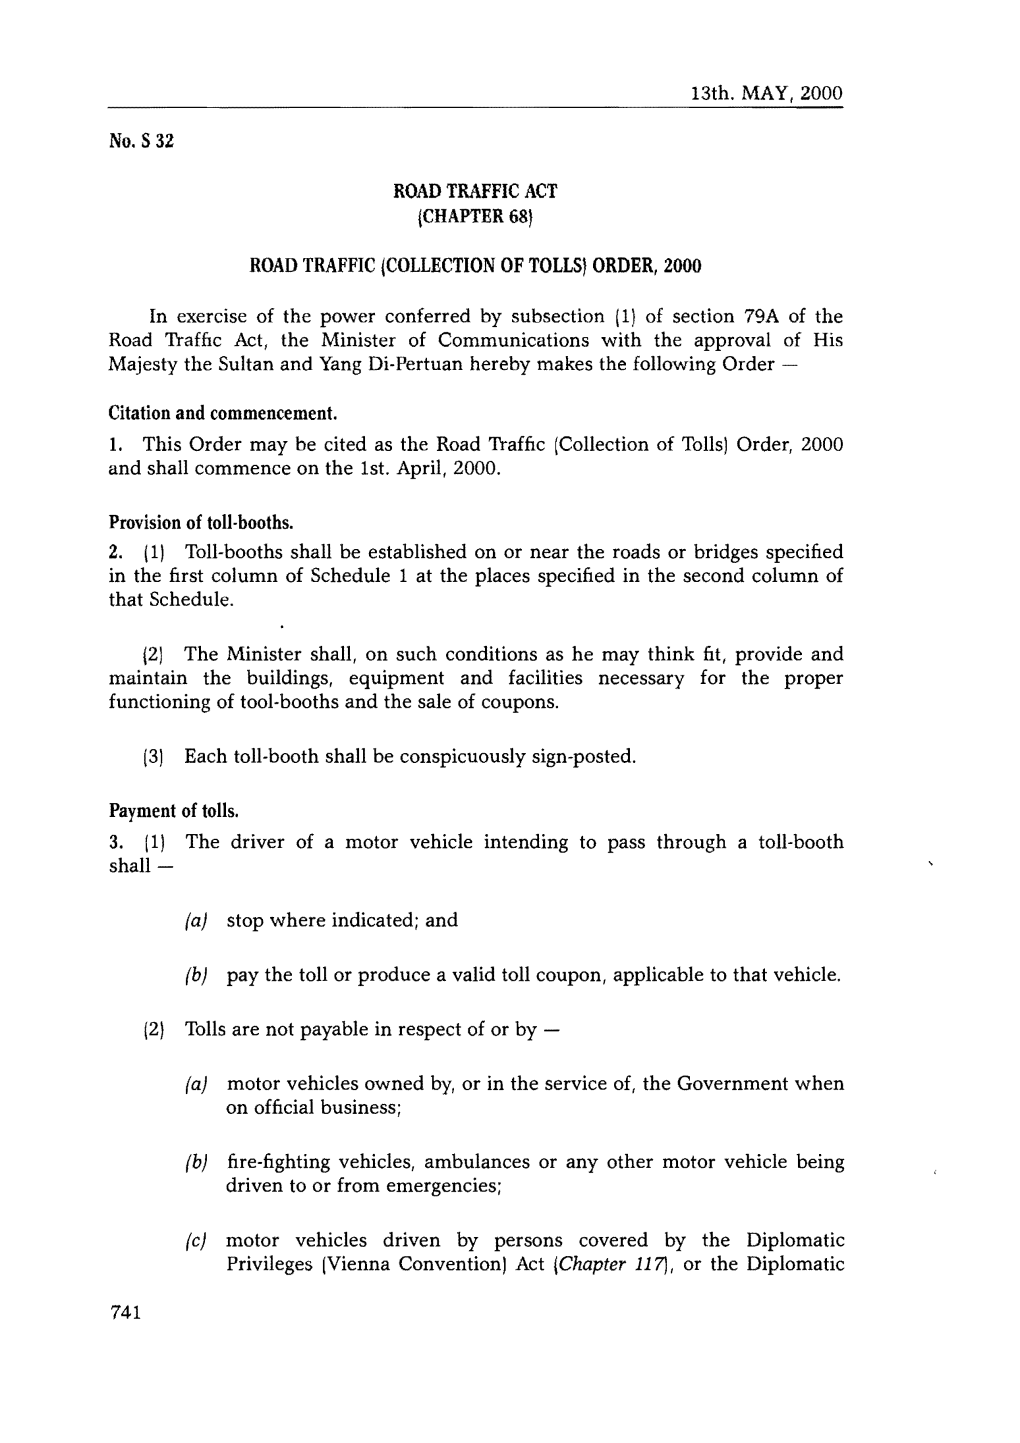 Road Traffic Act Road Traffic (Collection of Tolls) Order, 2000